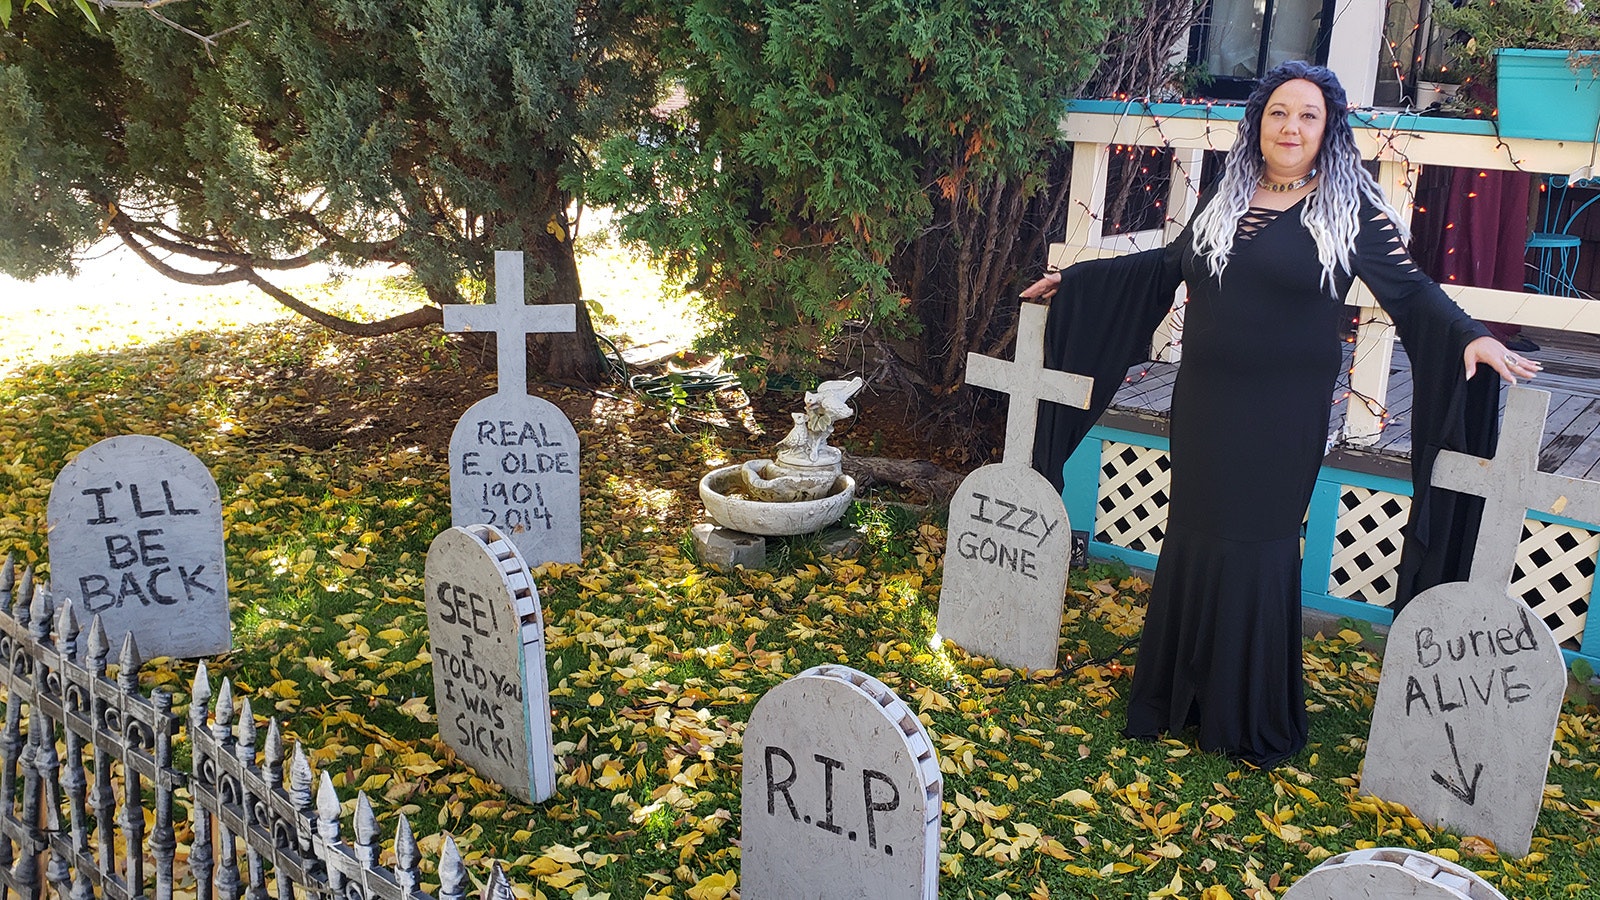 A yard full of cemetery stones with funny sayings on them is part of the usual Halloween decor for Desiree Ross, who's proud to be Worland's "Queen of Halloween."